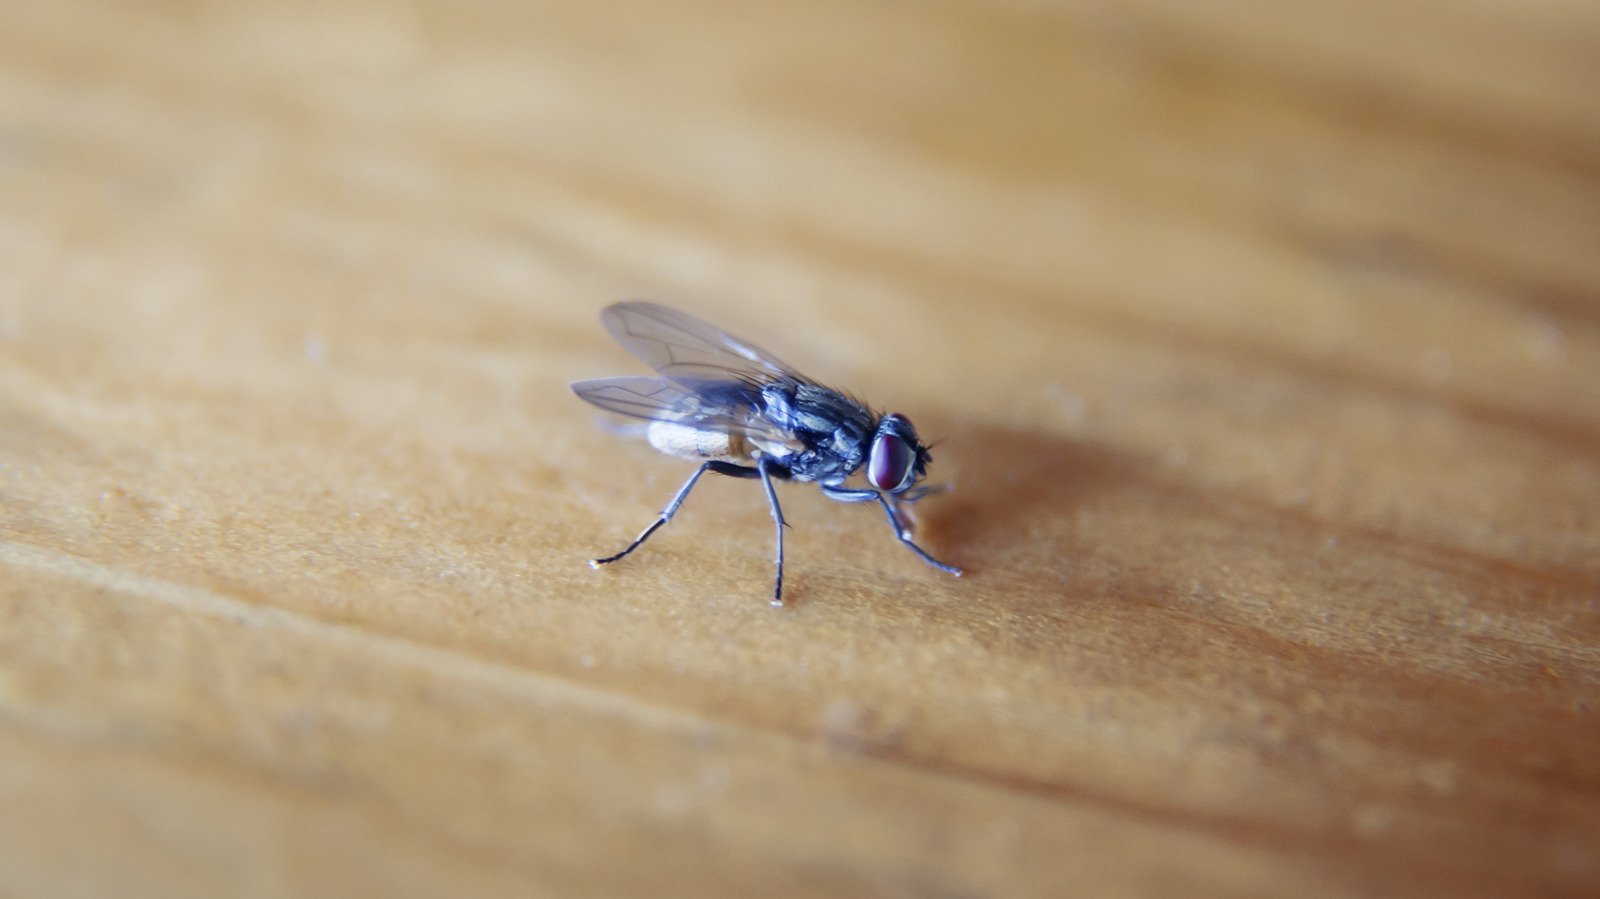 How To Use A Plastic Bag To Keep Flies Out Of Your Home